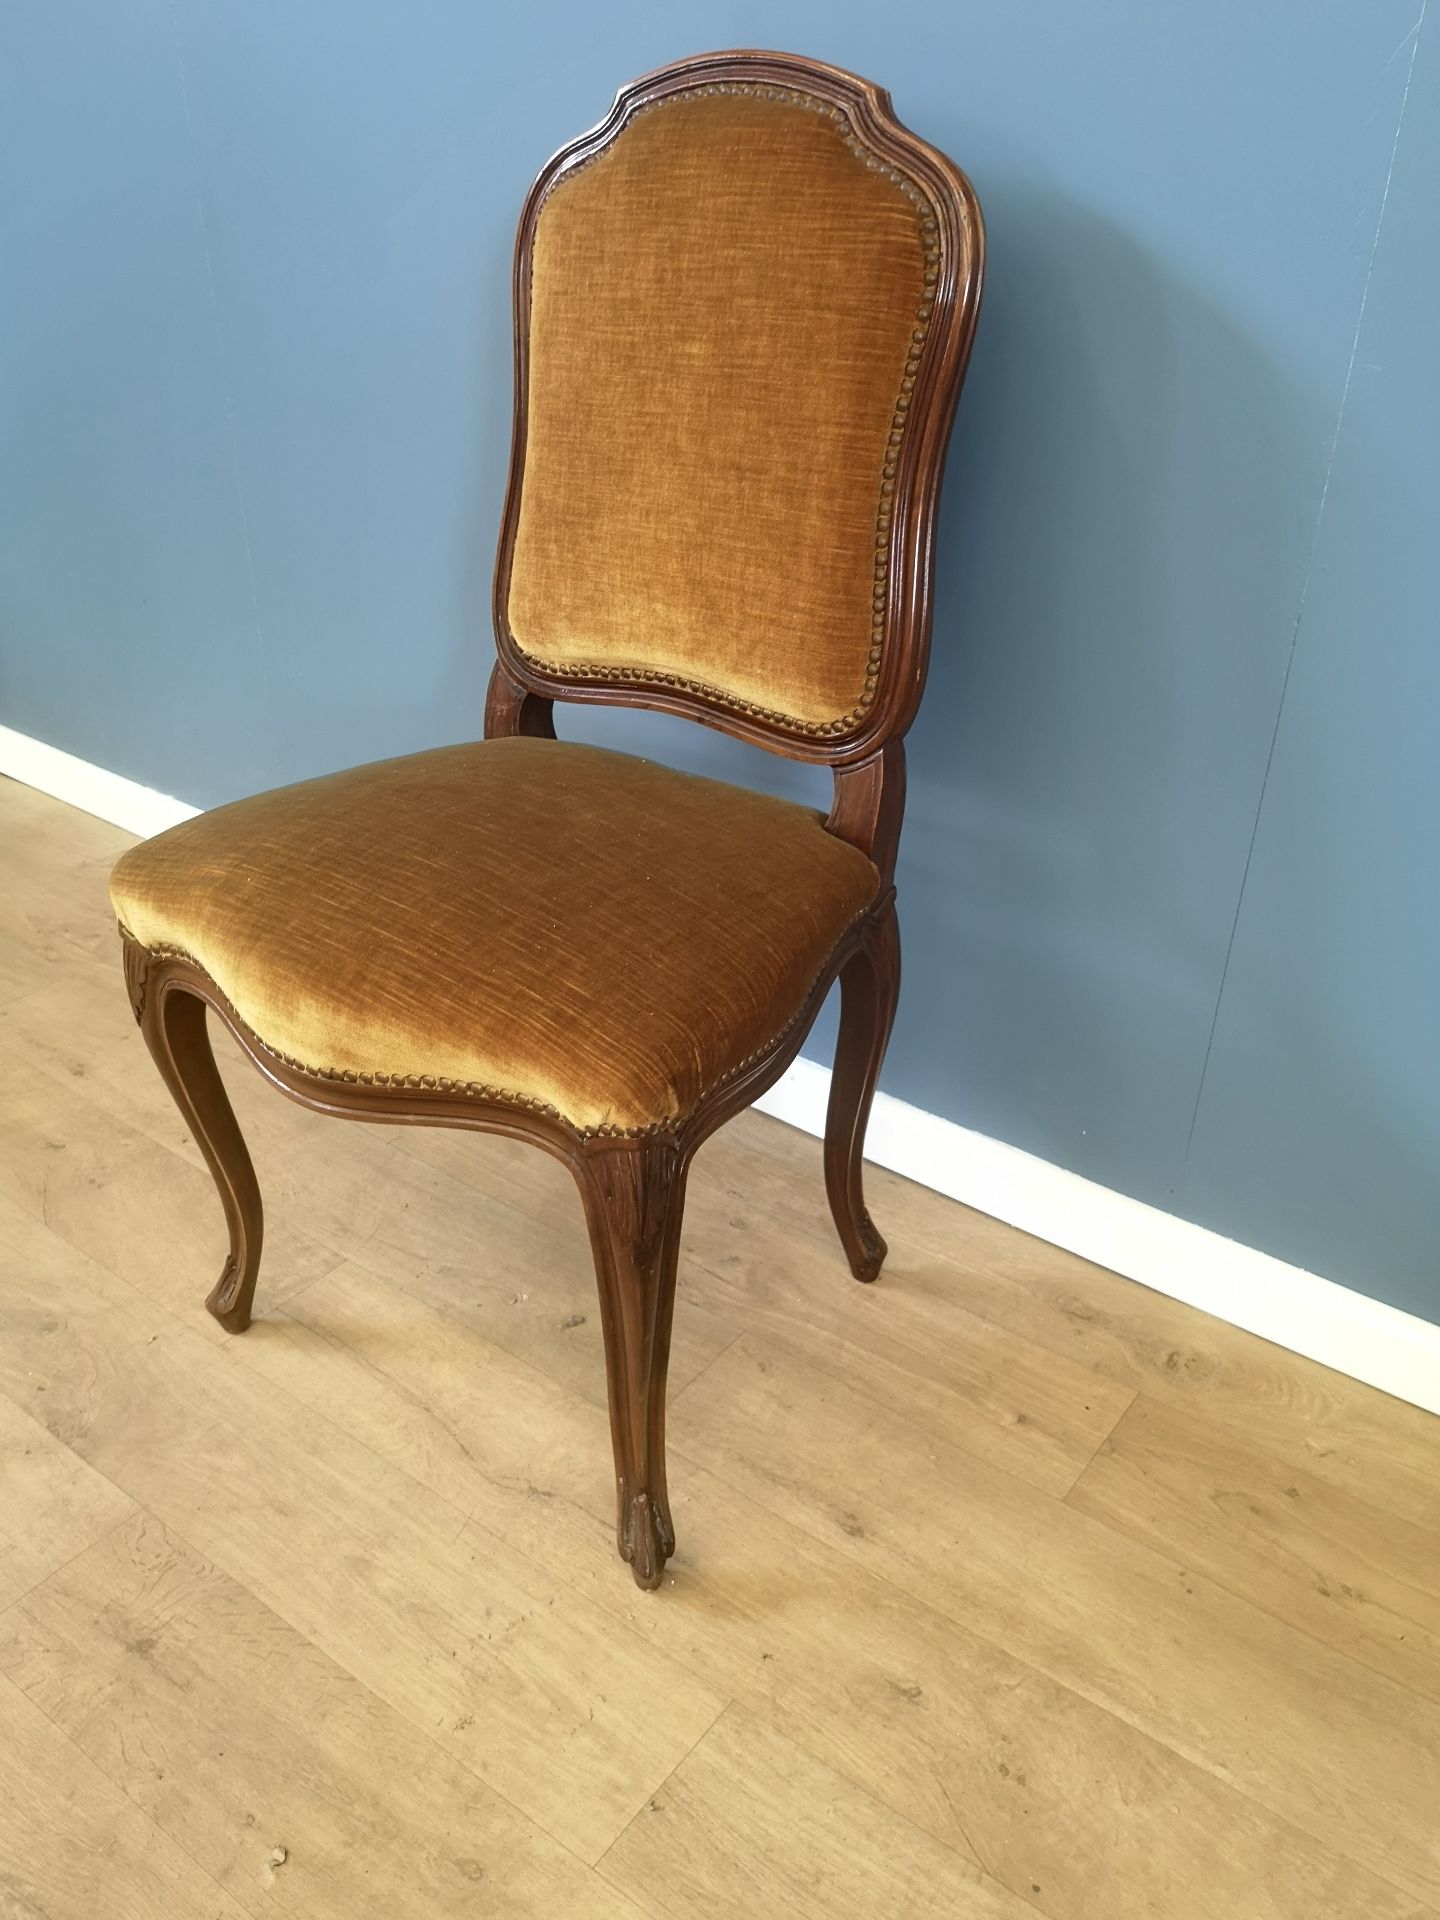 Six upholstered dining chairs - Image 3 of 4